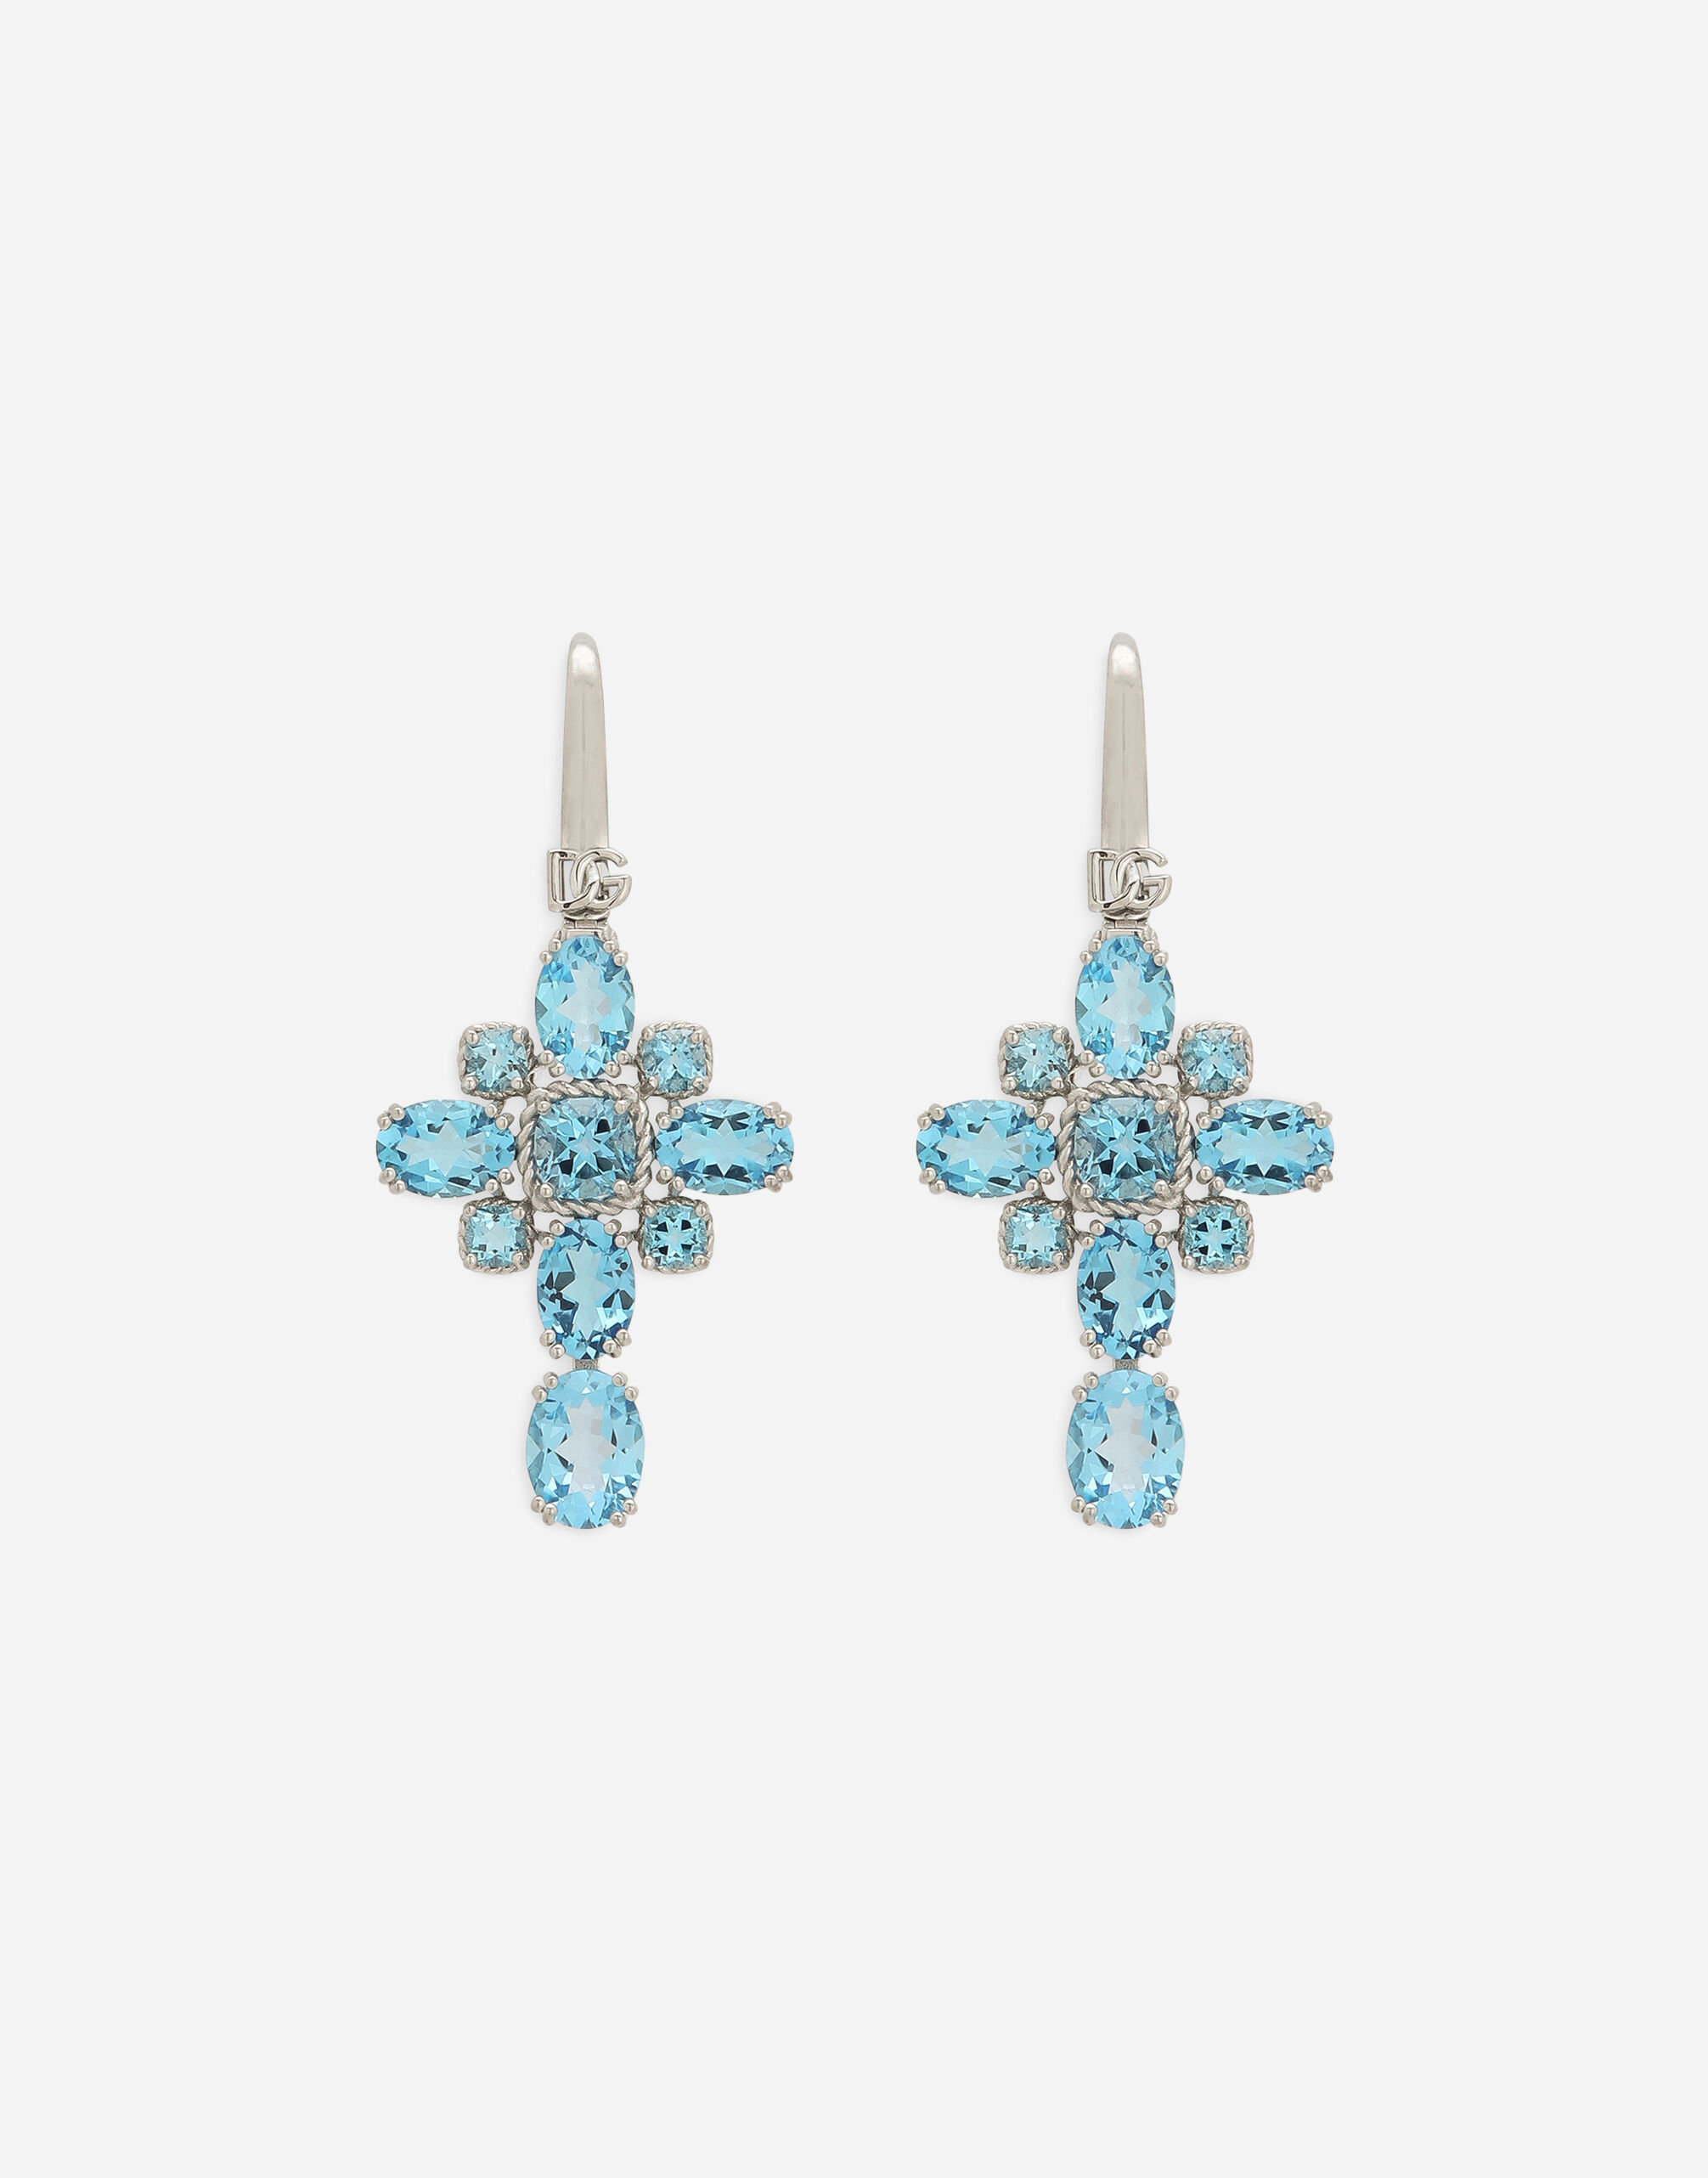 Dolce & Gabbana Anna earrings in white gold 18kt with light blue topazes Weiss WEQD4GWPAVE